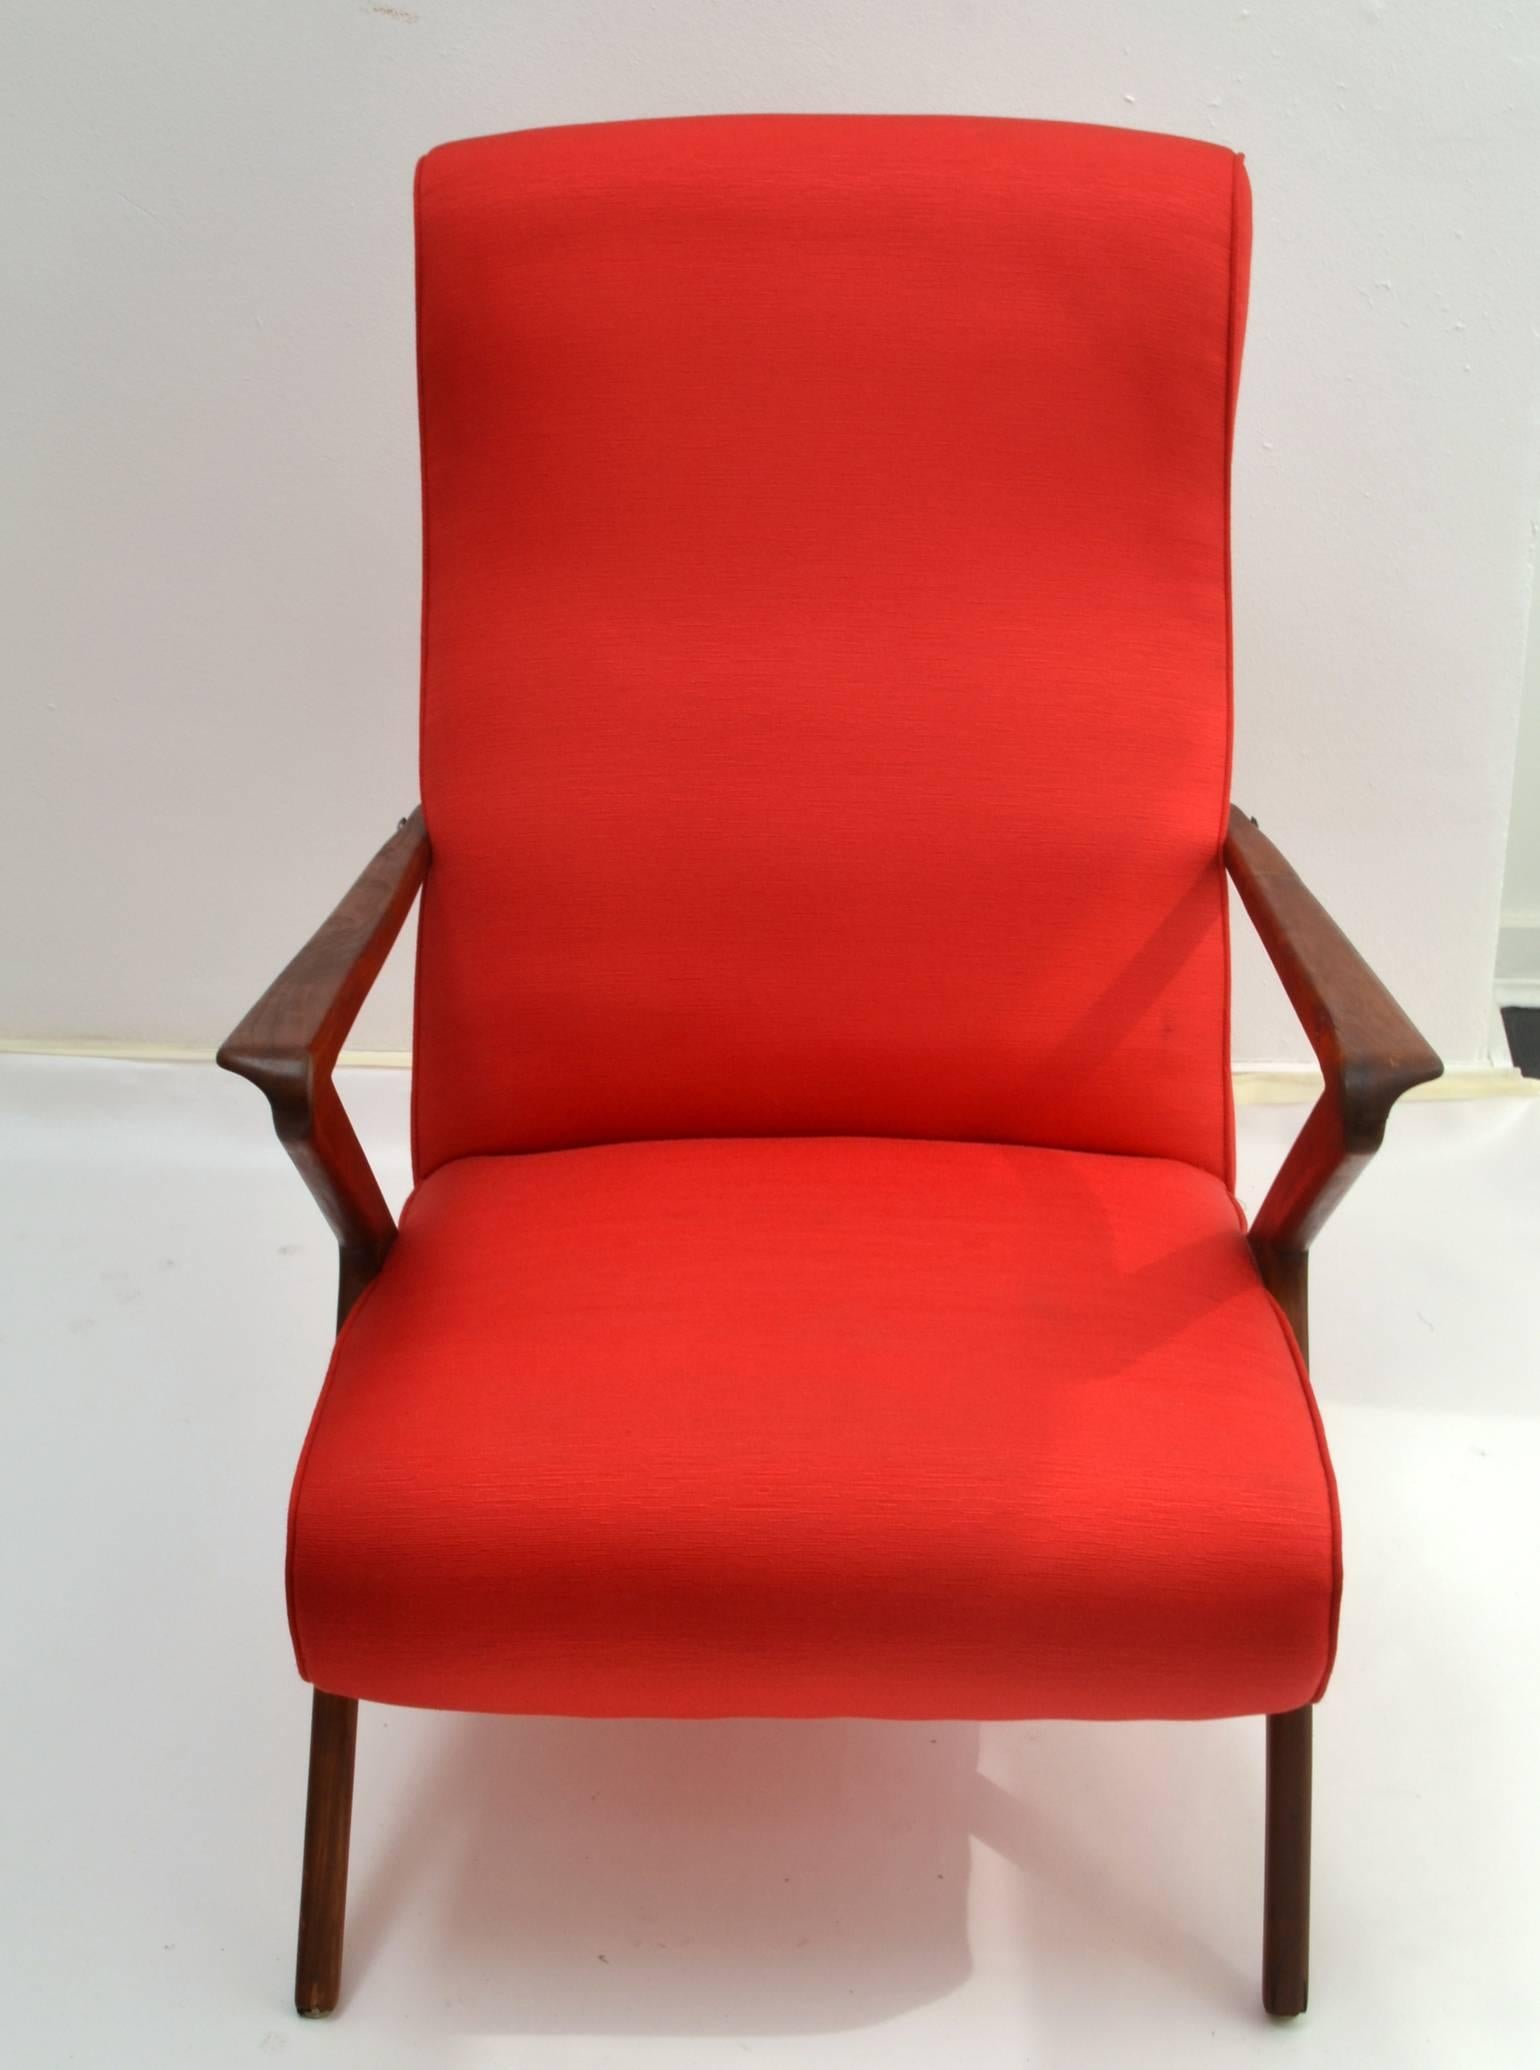 20th Century 1950s Pair of Red Italian Lounge Chairs, Mahogany Frame with Pronounced Armrests